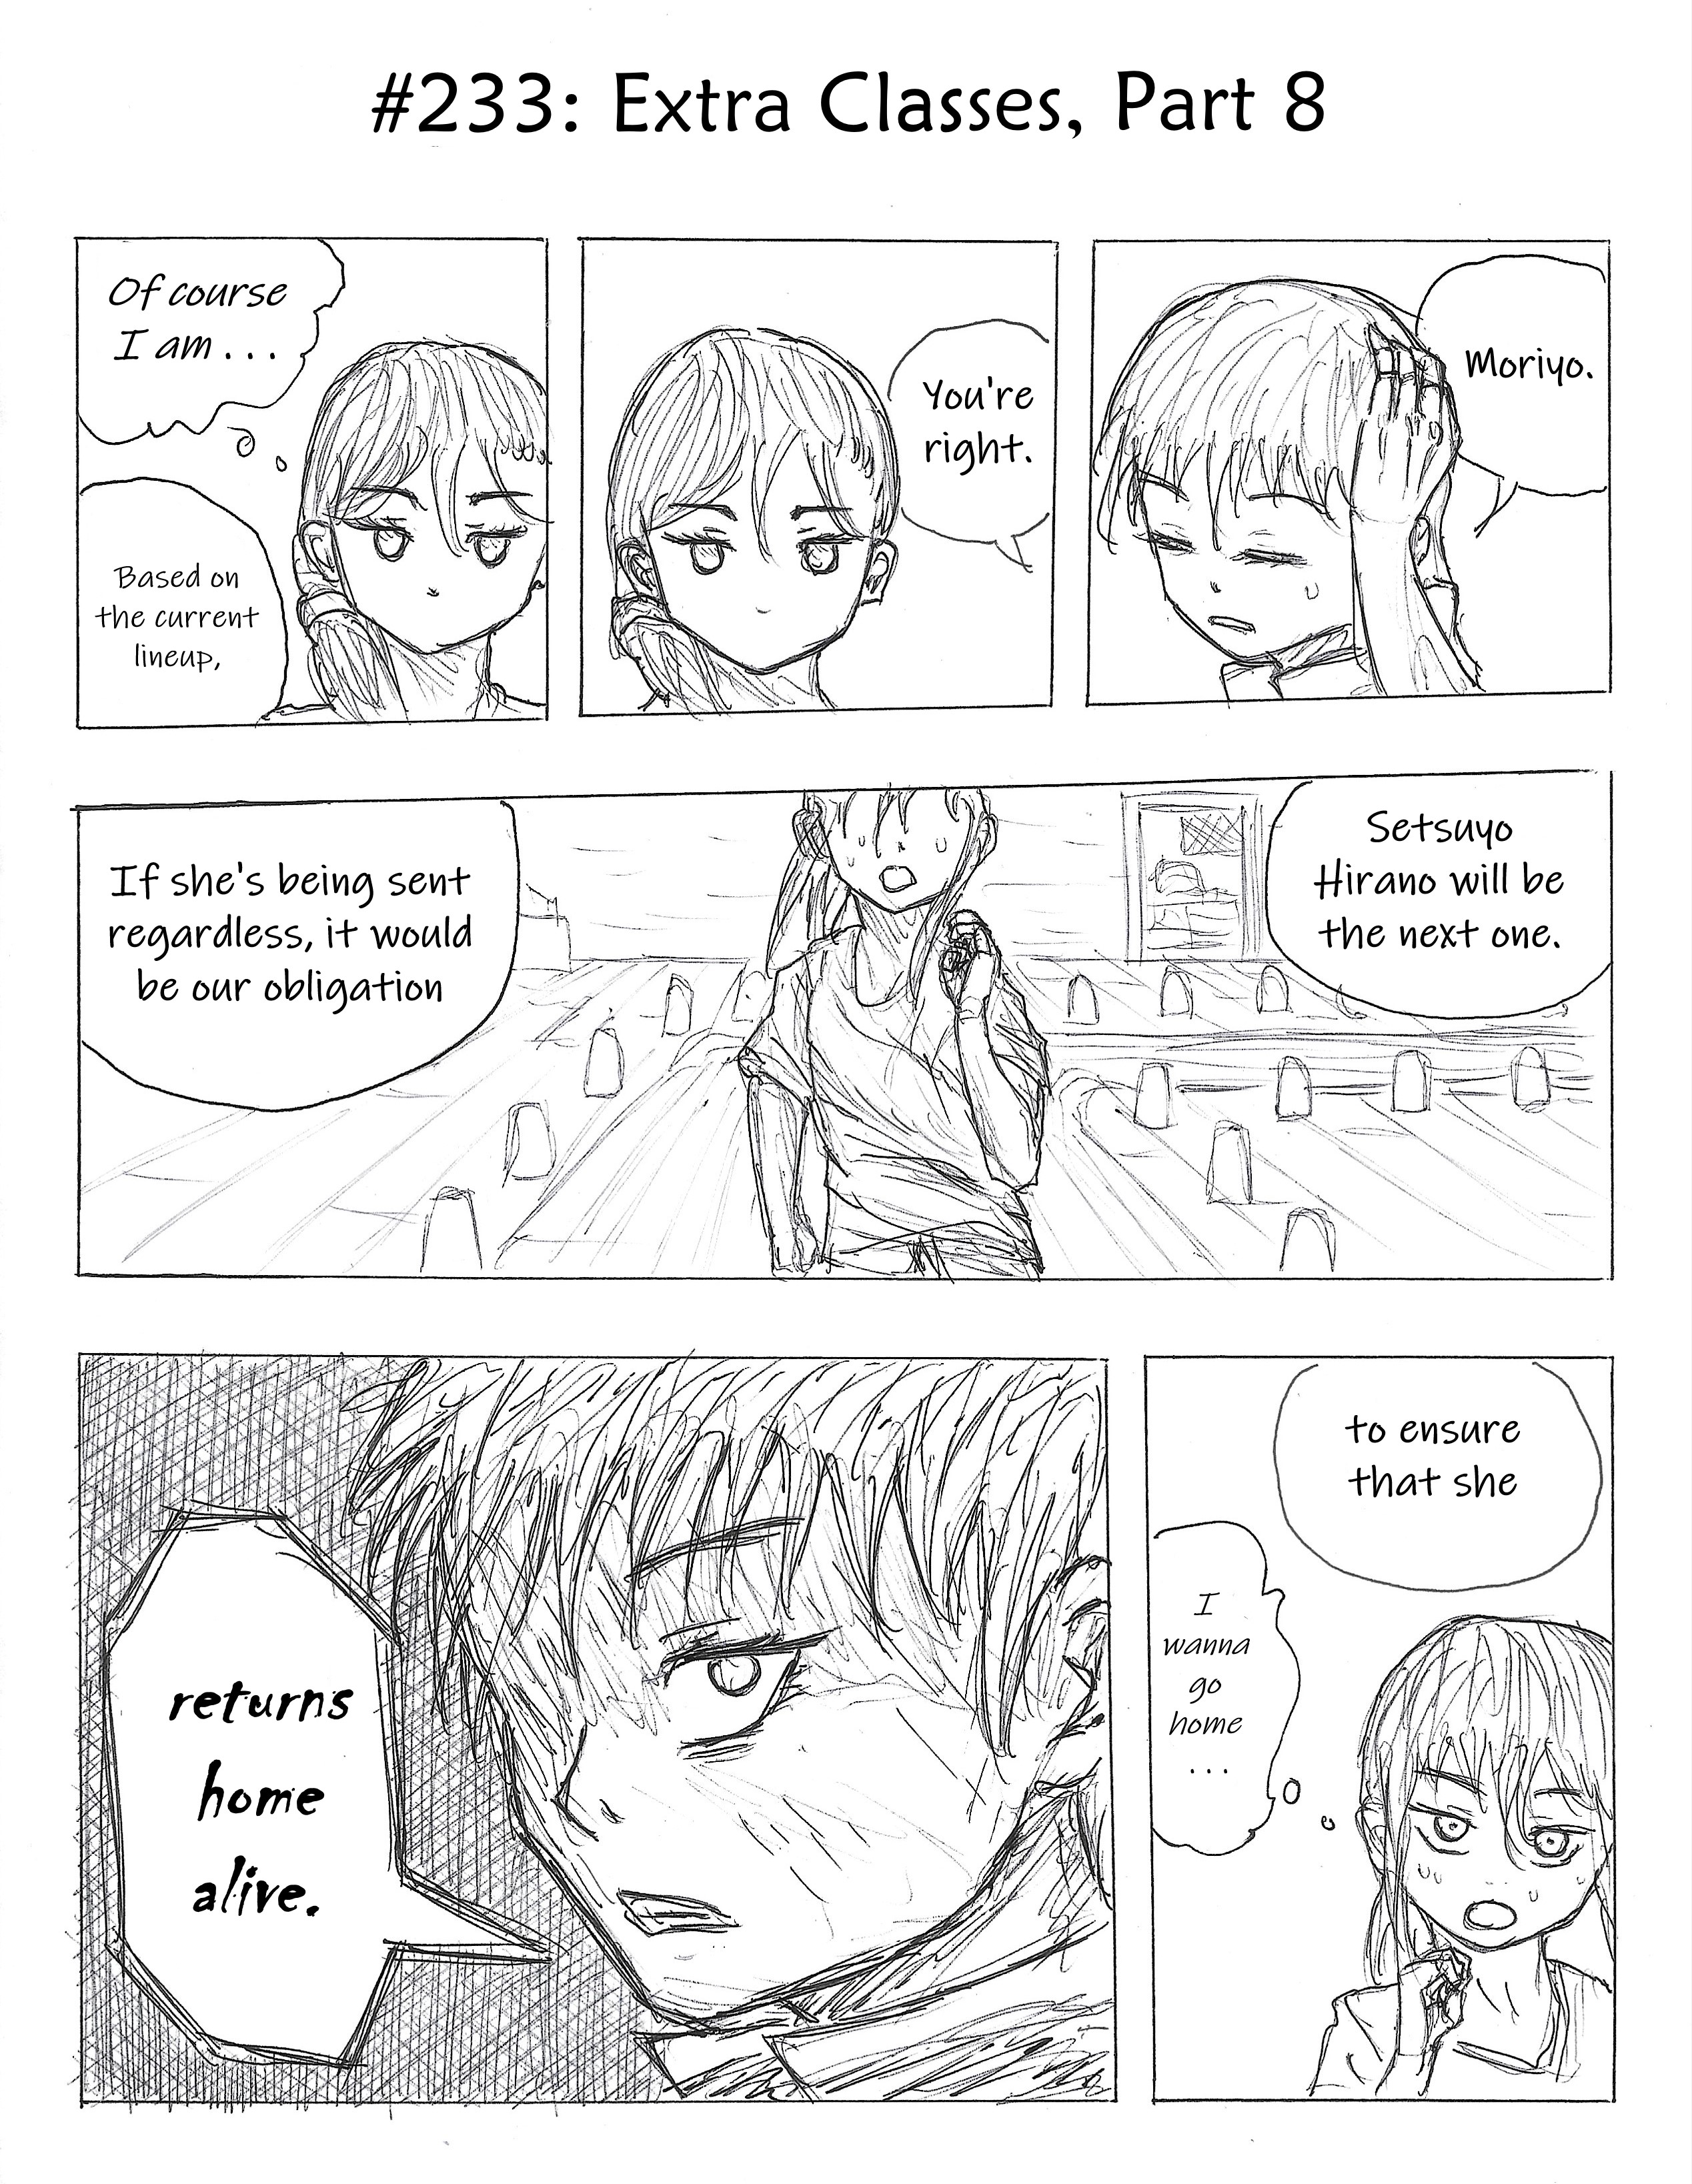 Sound Asleep: Forgotten Memories Vol.3 Chapter 233: Extra Classes, Part 8 - Picture 1